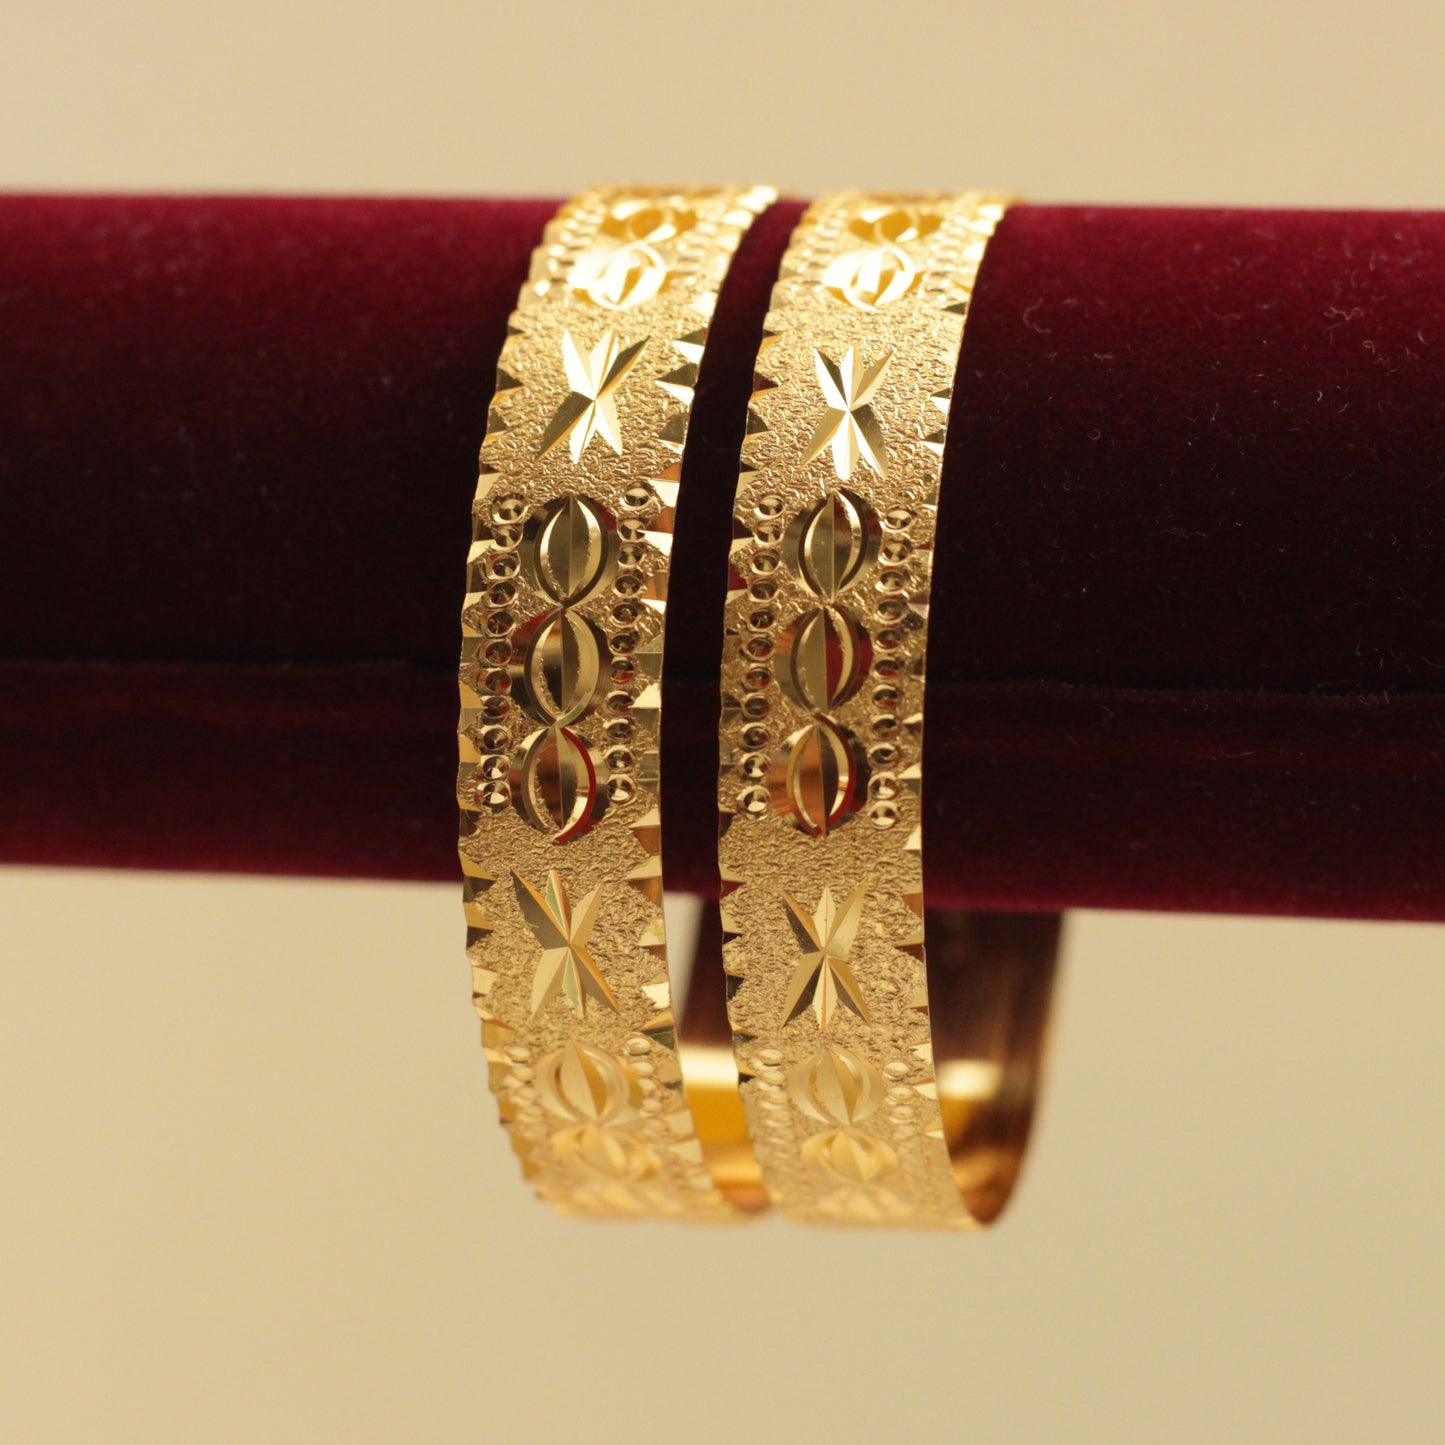 Real Gold Tone Set of 2 Thick Bangles - SS017 - Daily Wear/Office Wear/Function Wear Bangles